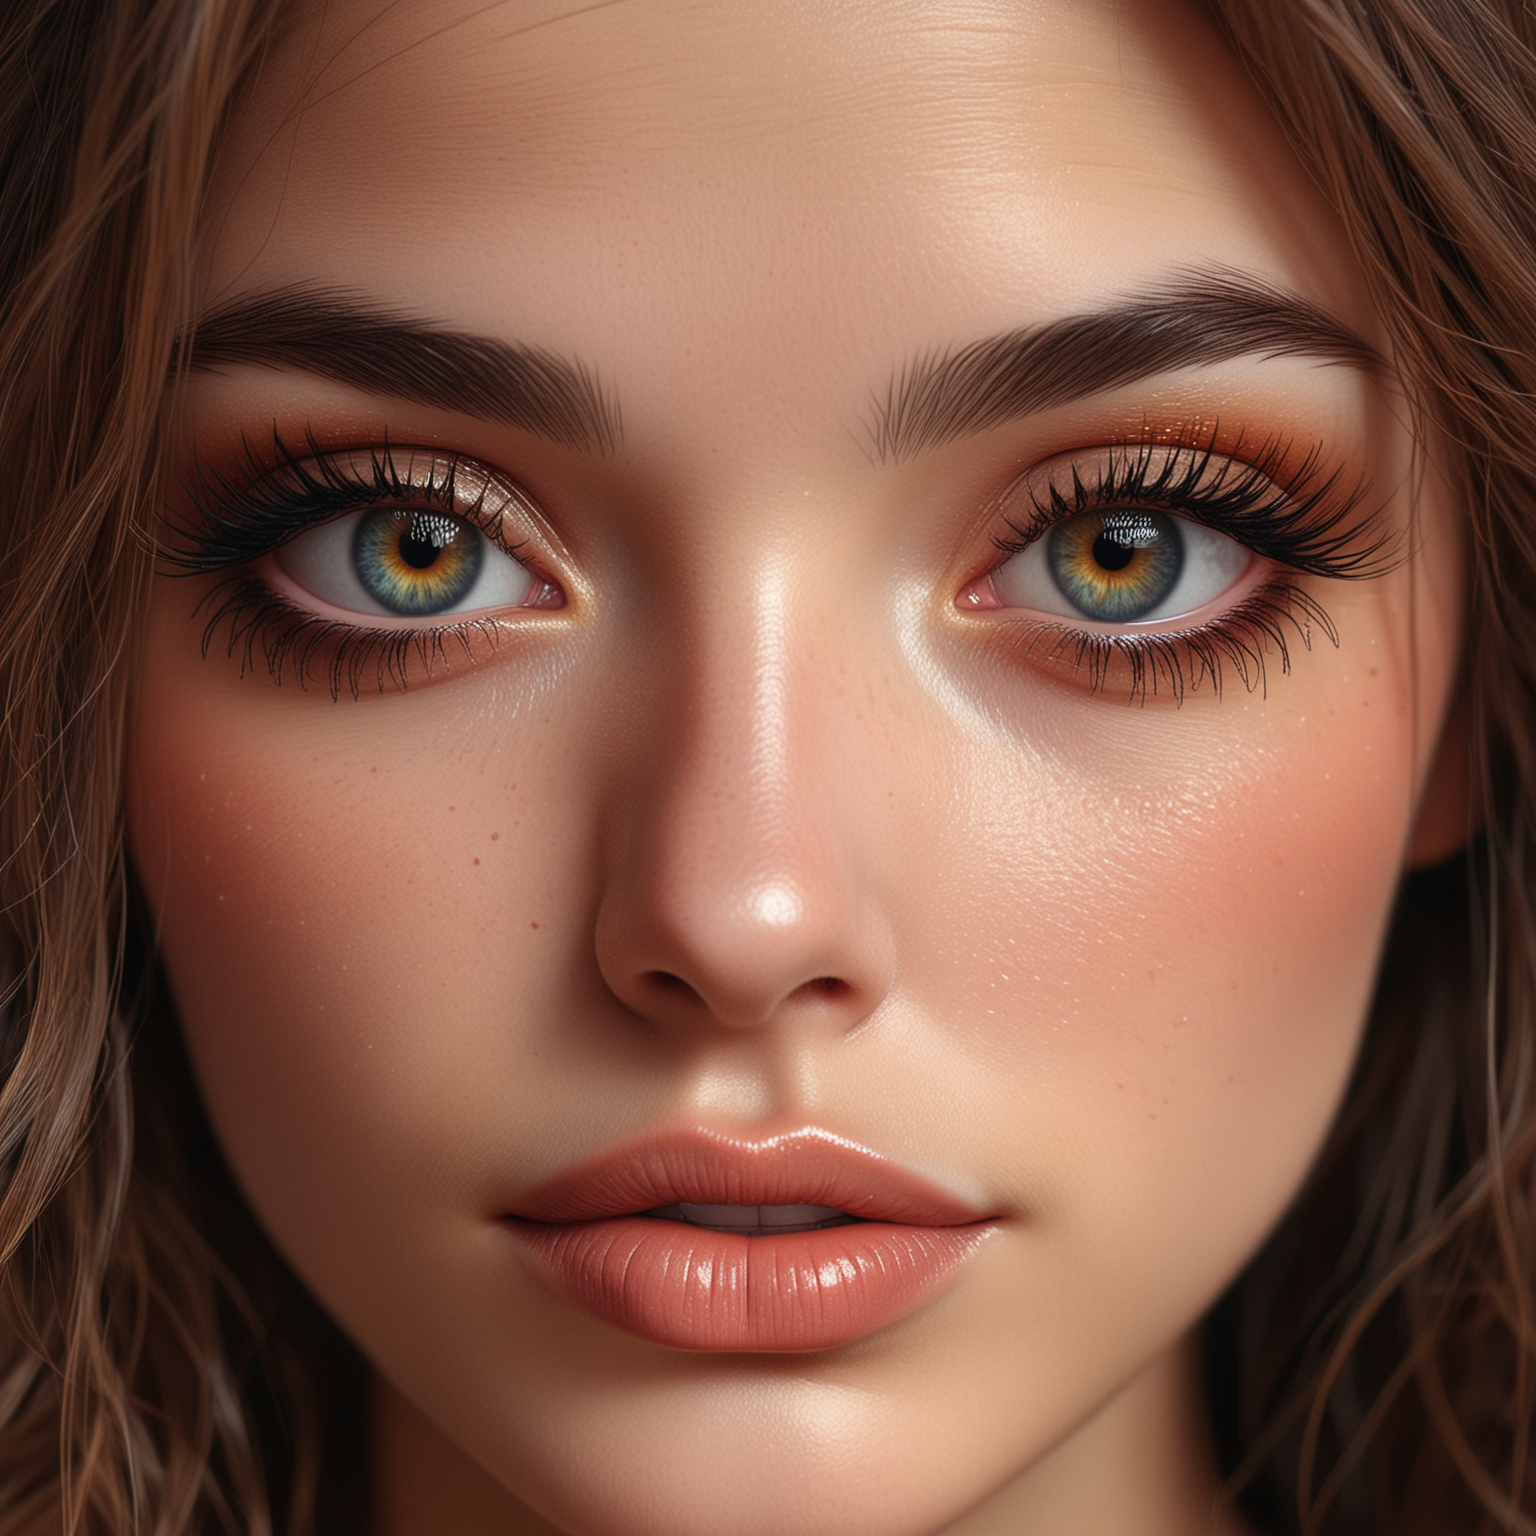 Ethereal Portrait with Detailed Features and Vibrant Colors